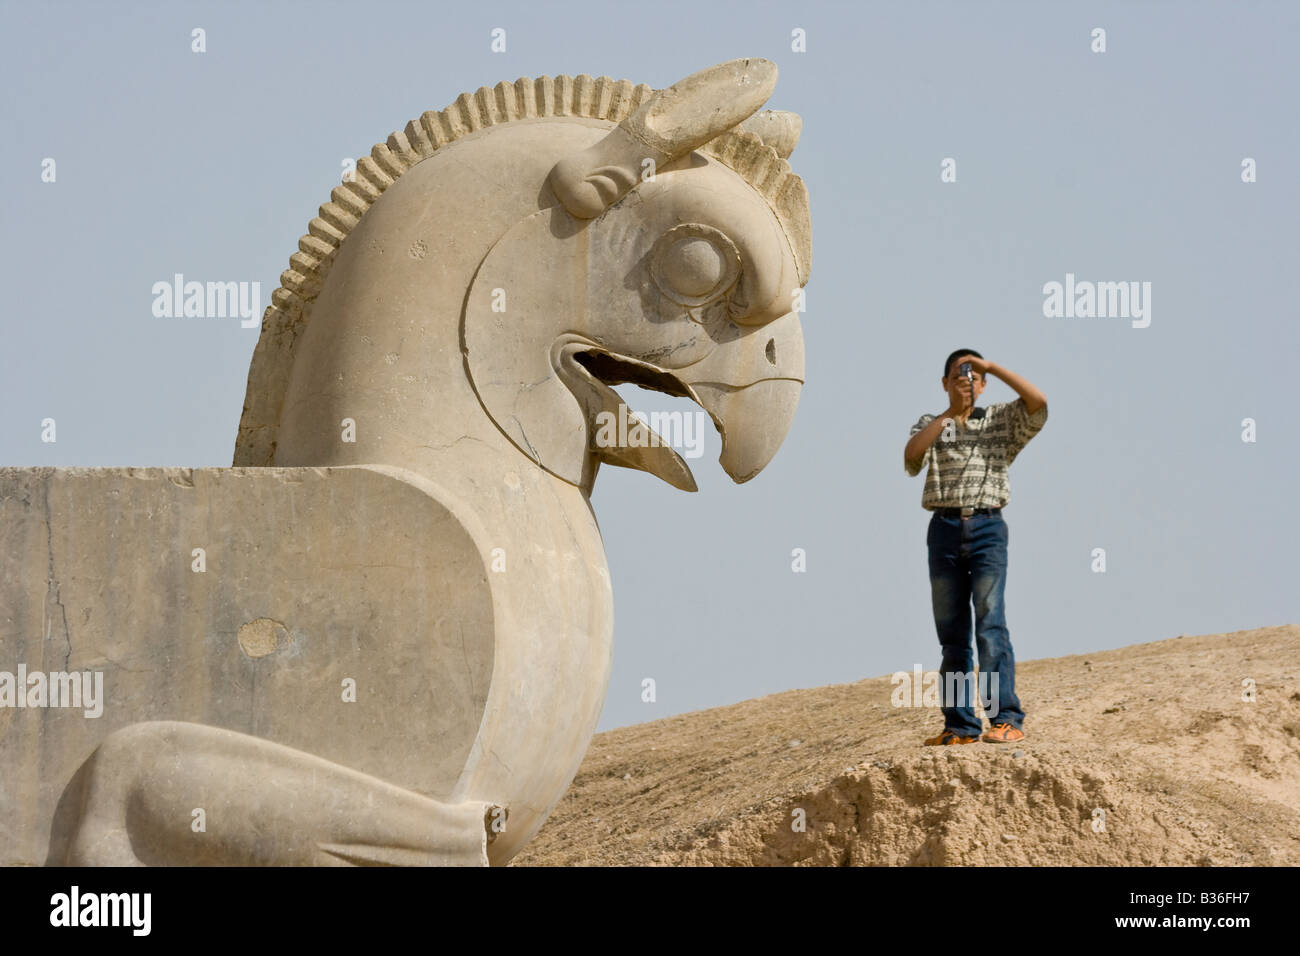 Iranian boy taking a picture of the Statue of a Homa at the Ruins of Persepolis Stock Photo